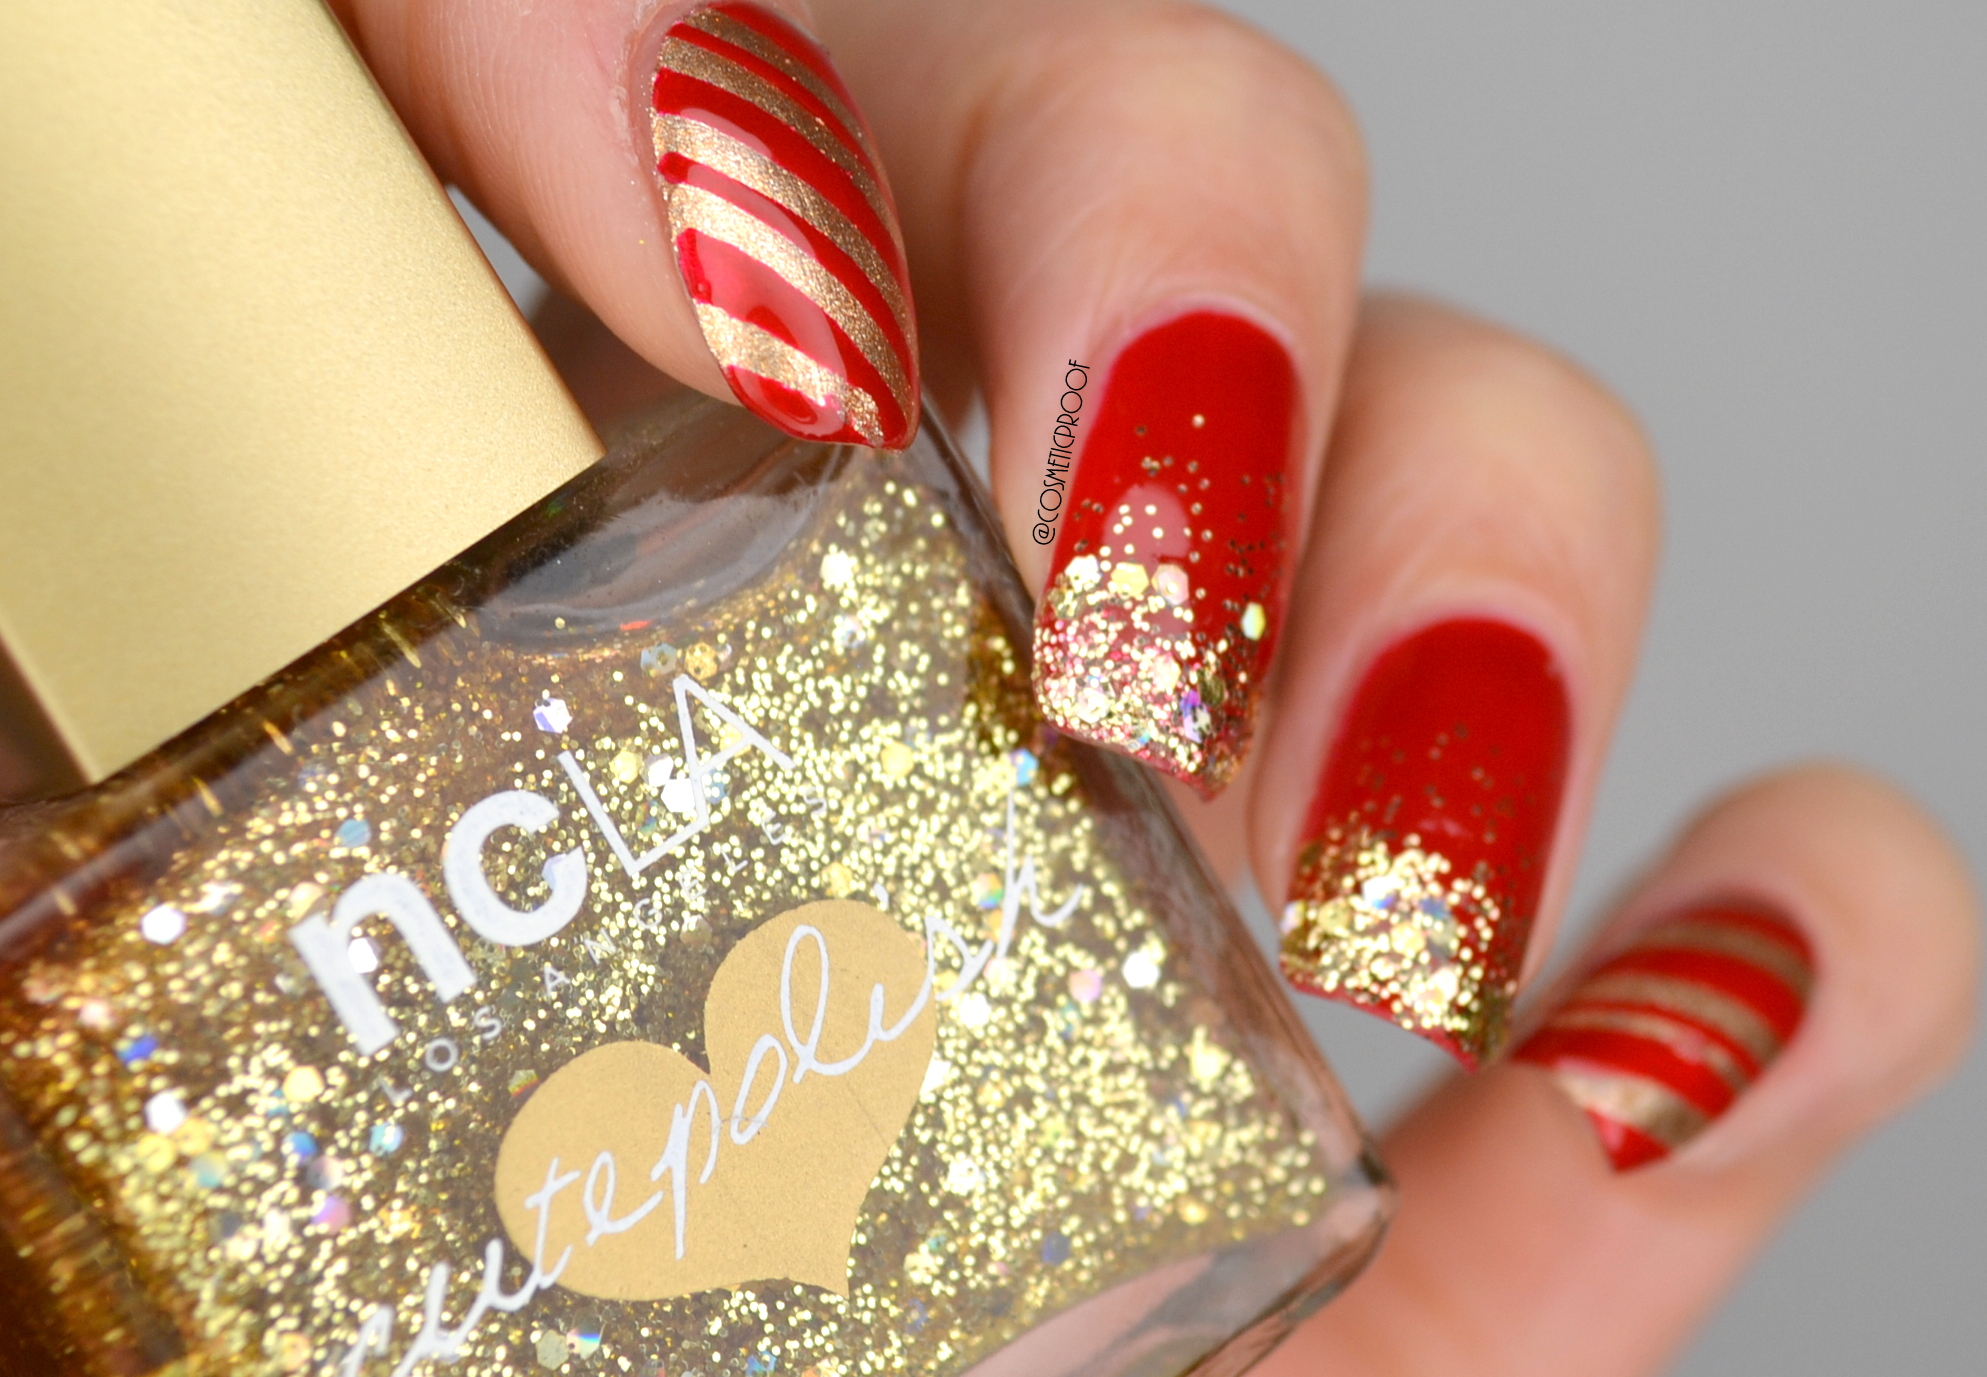 4. "Cute New Year's Nail Art on Tumblr" - wide 8